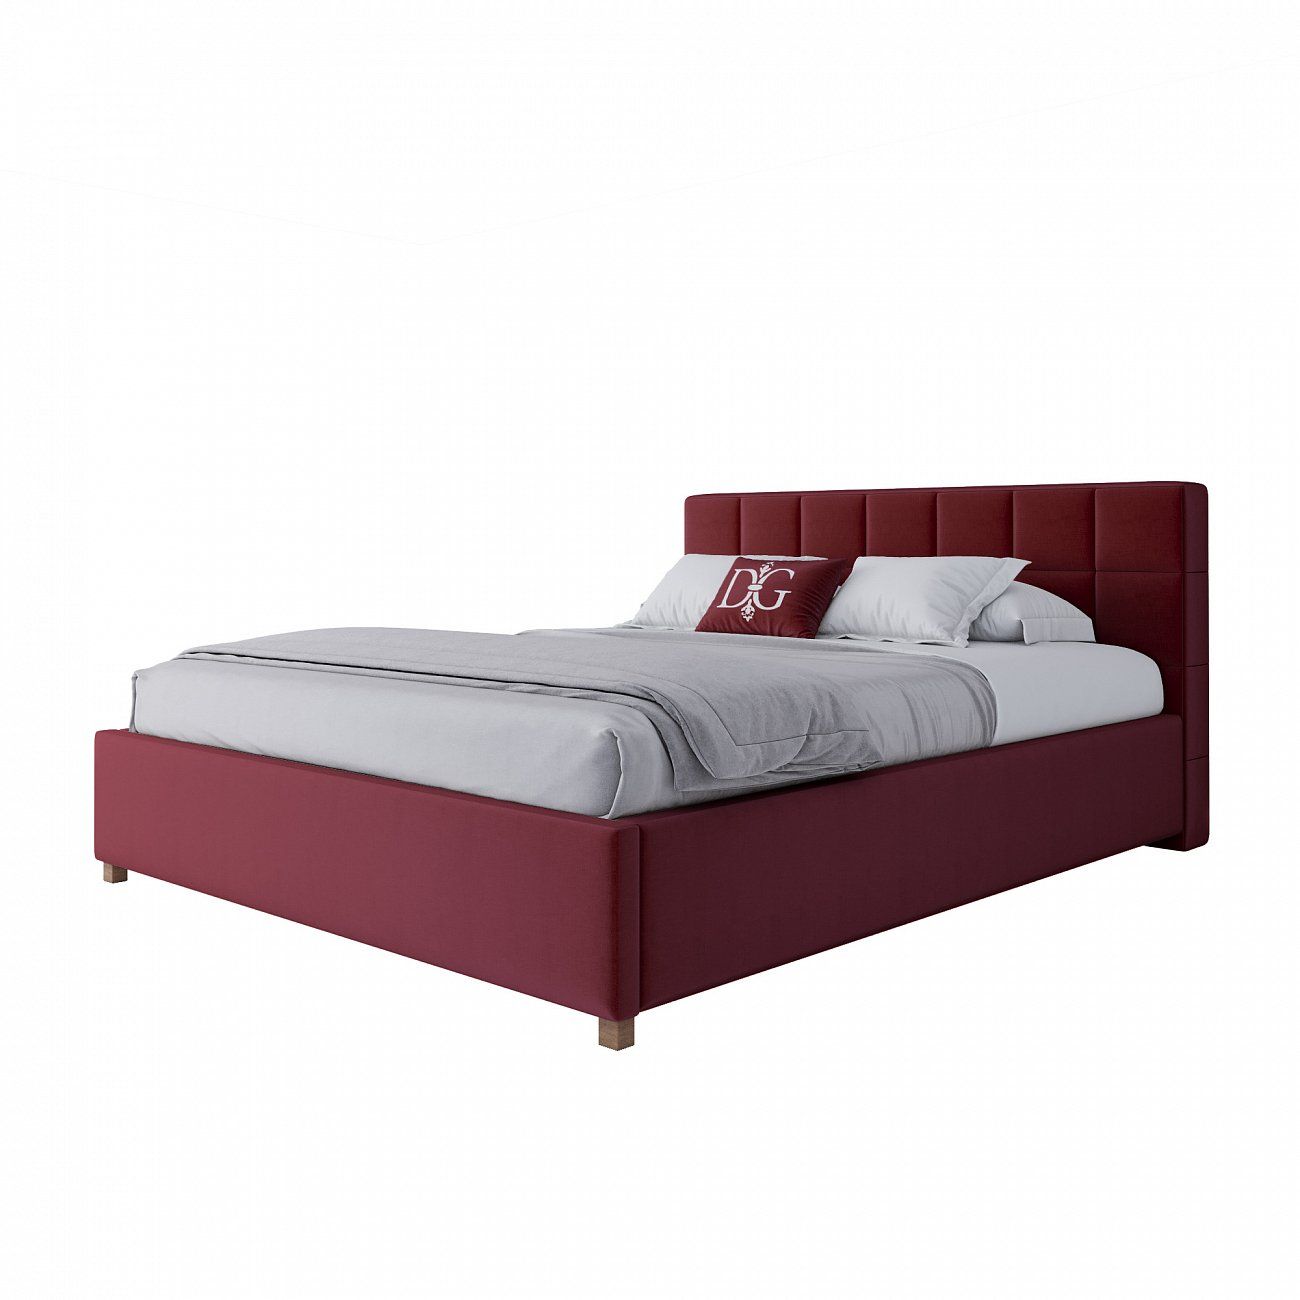 Double bed with upholstered headboard 160x200 cm red Wales